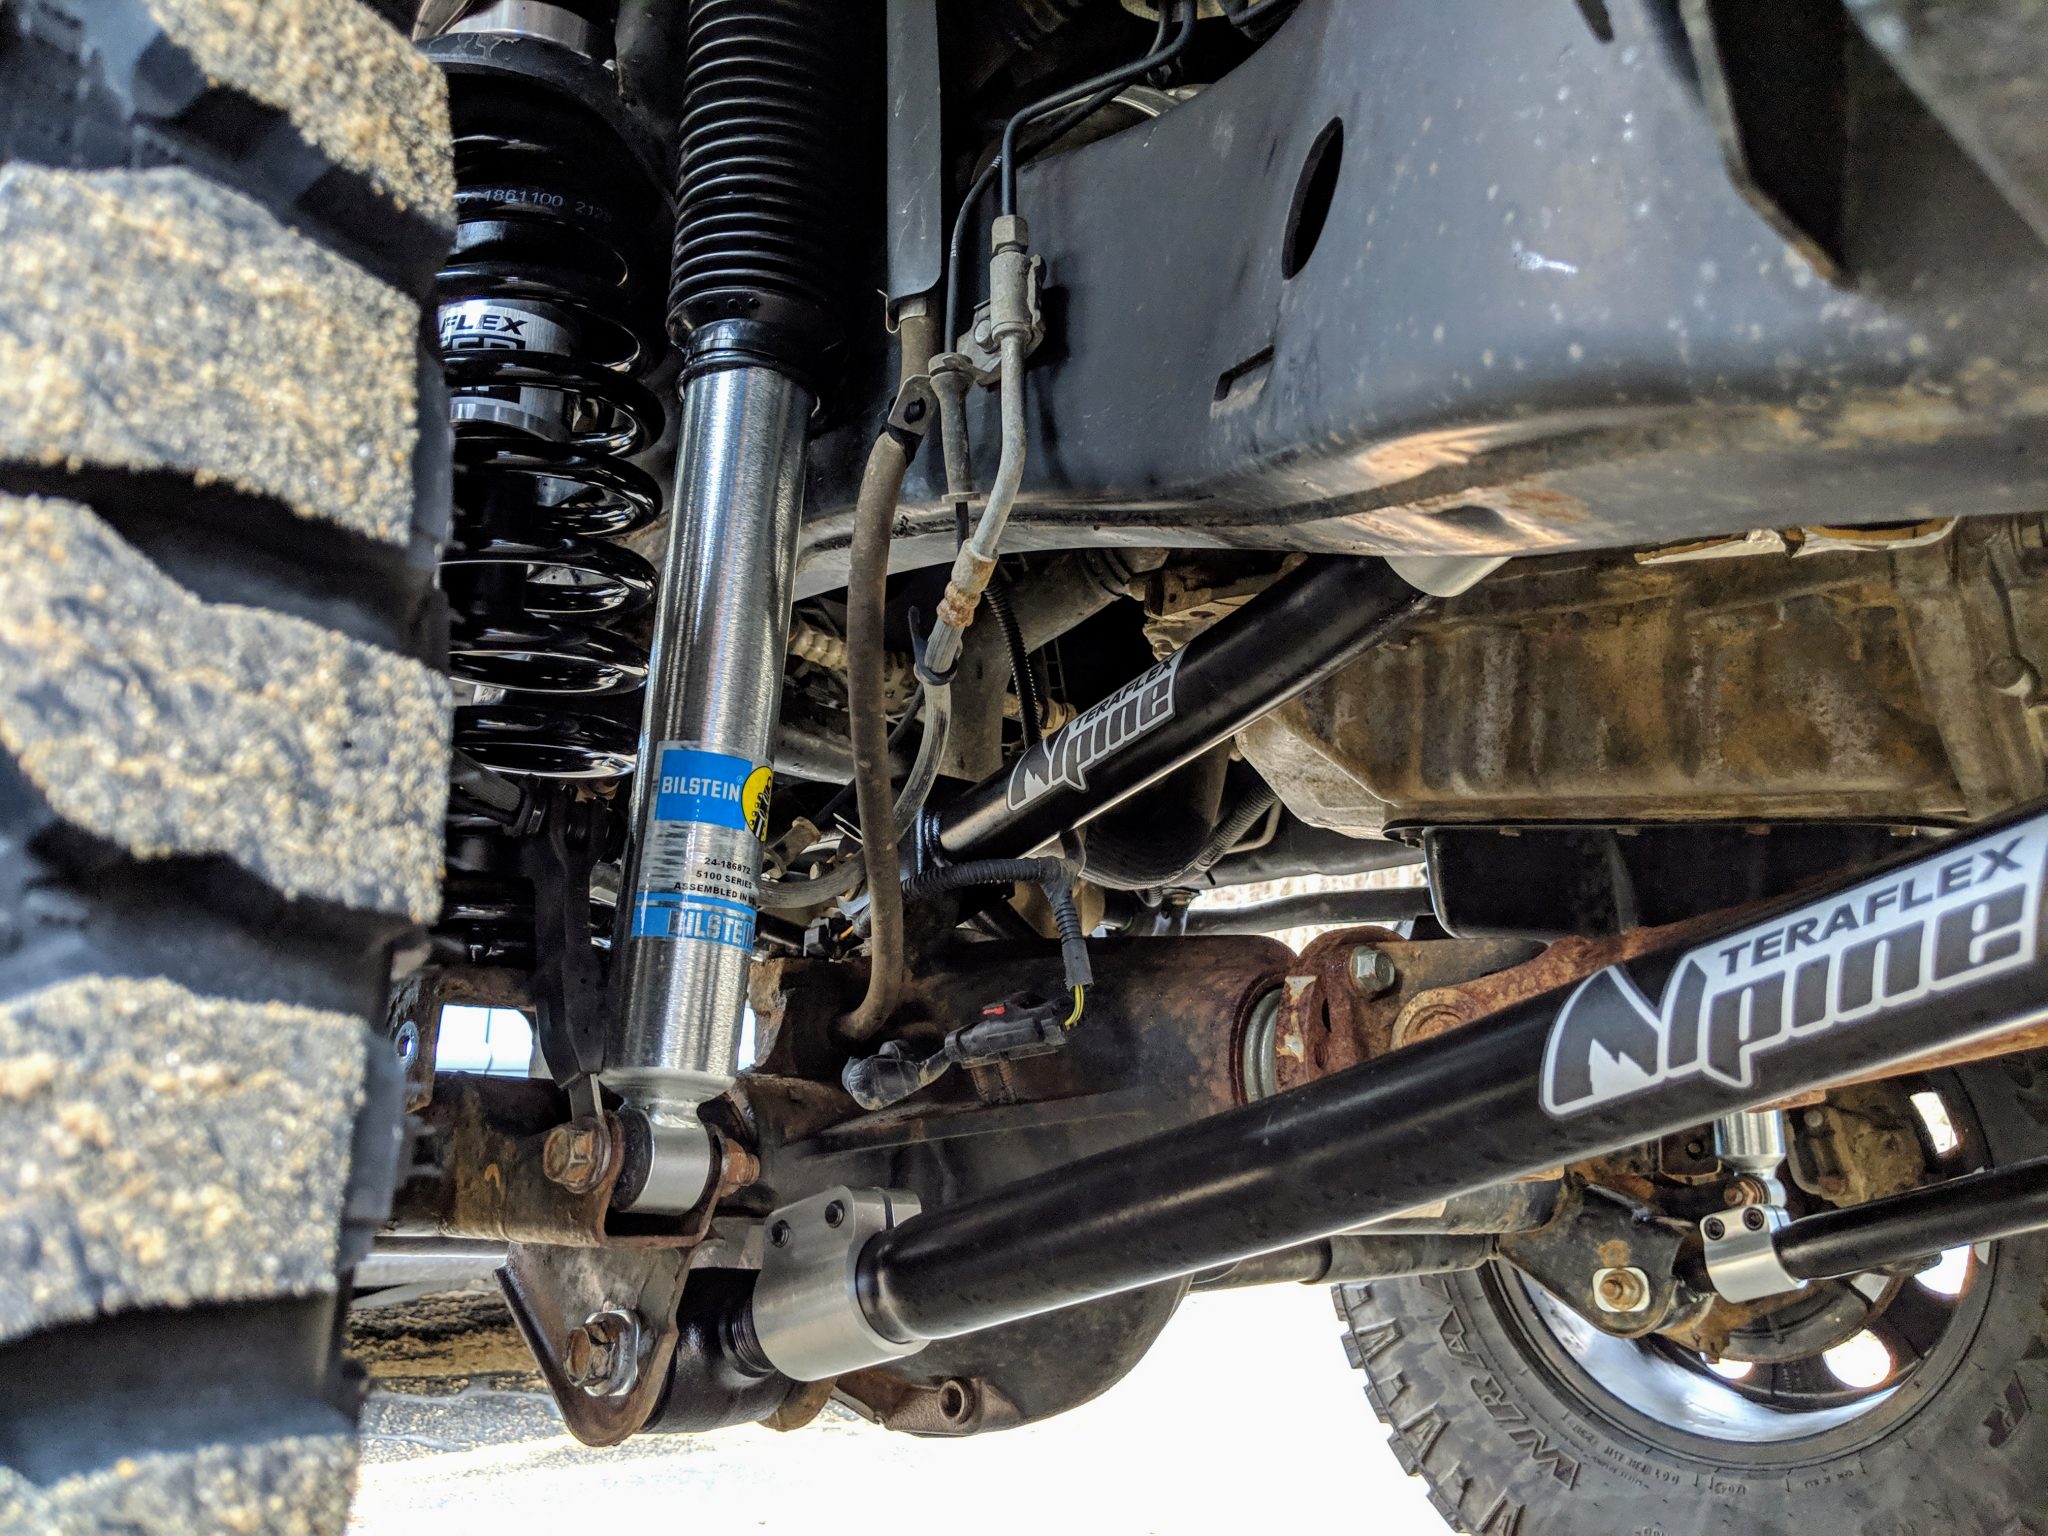 Bilstein shocks to smooth out the ride.